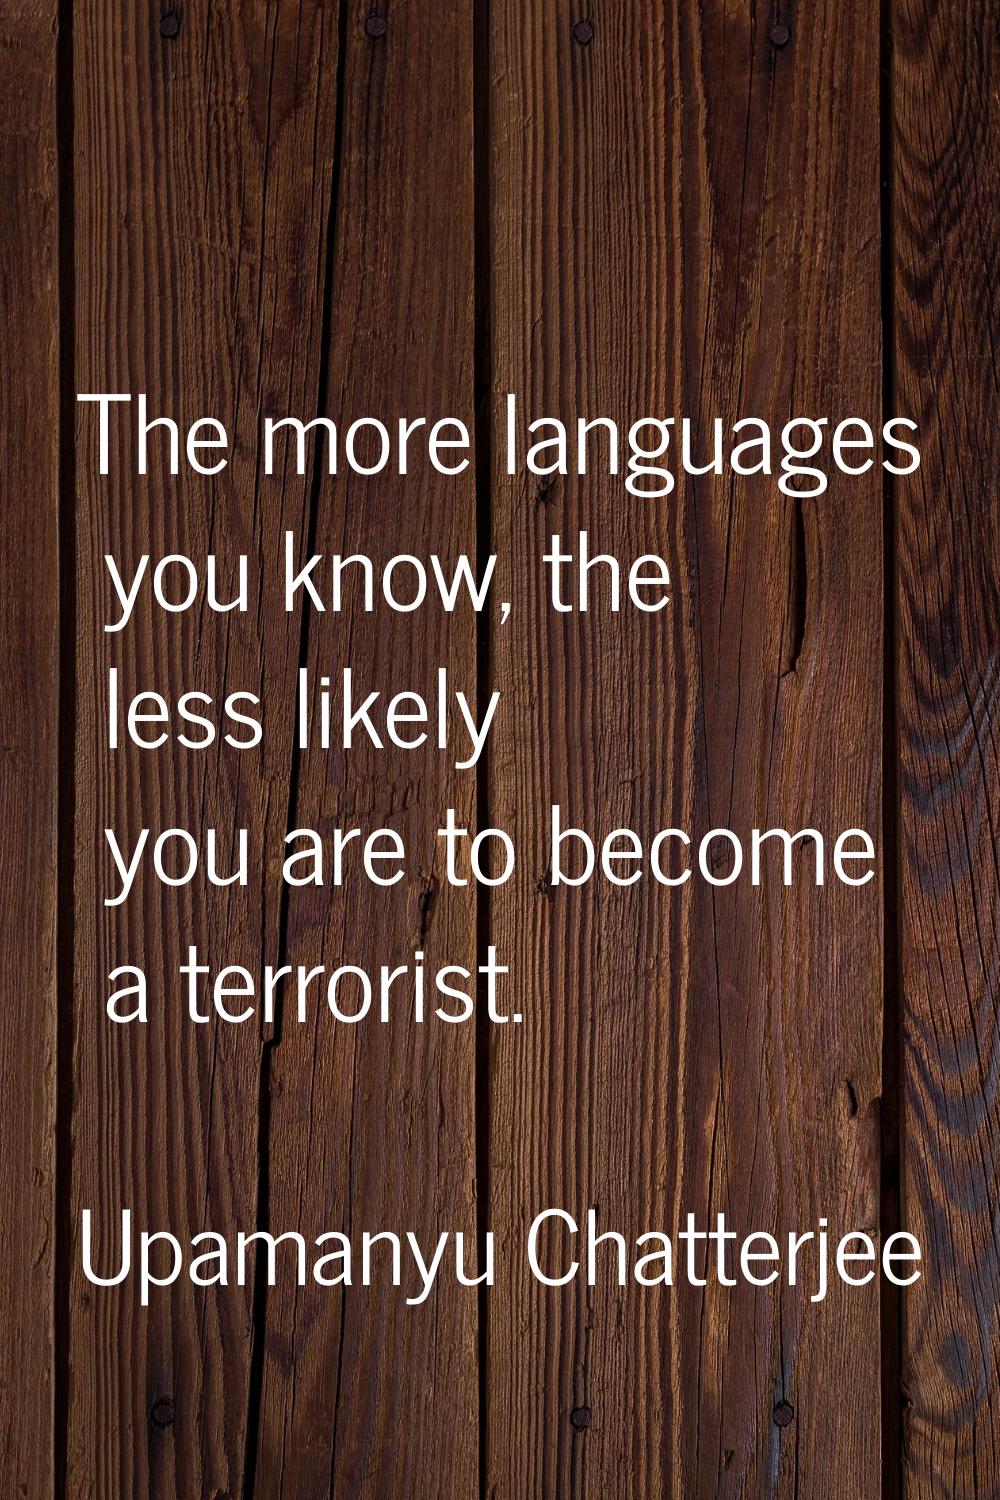 The more languages you know, the less likely you are to become a terrorist.